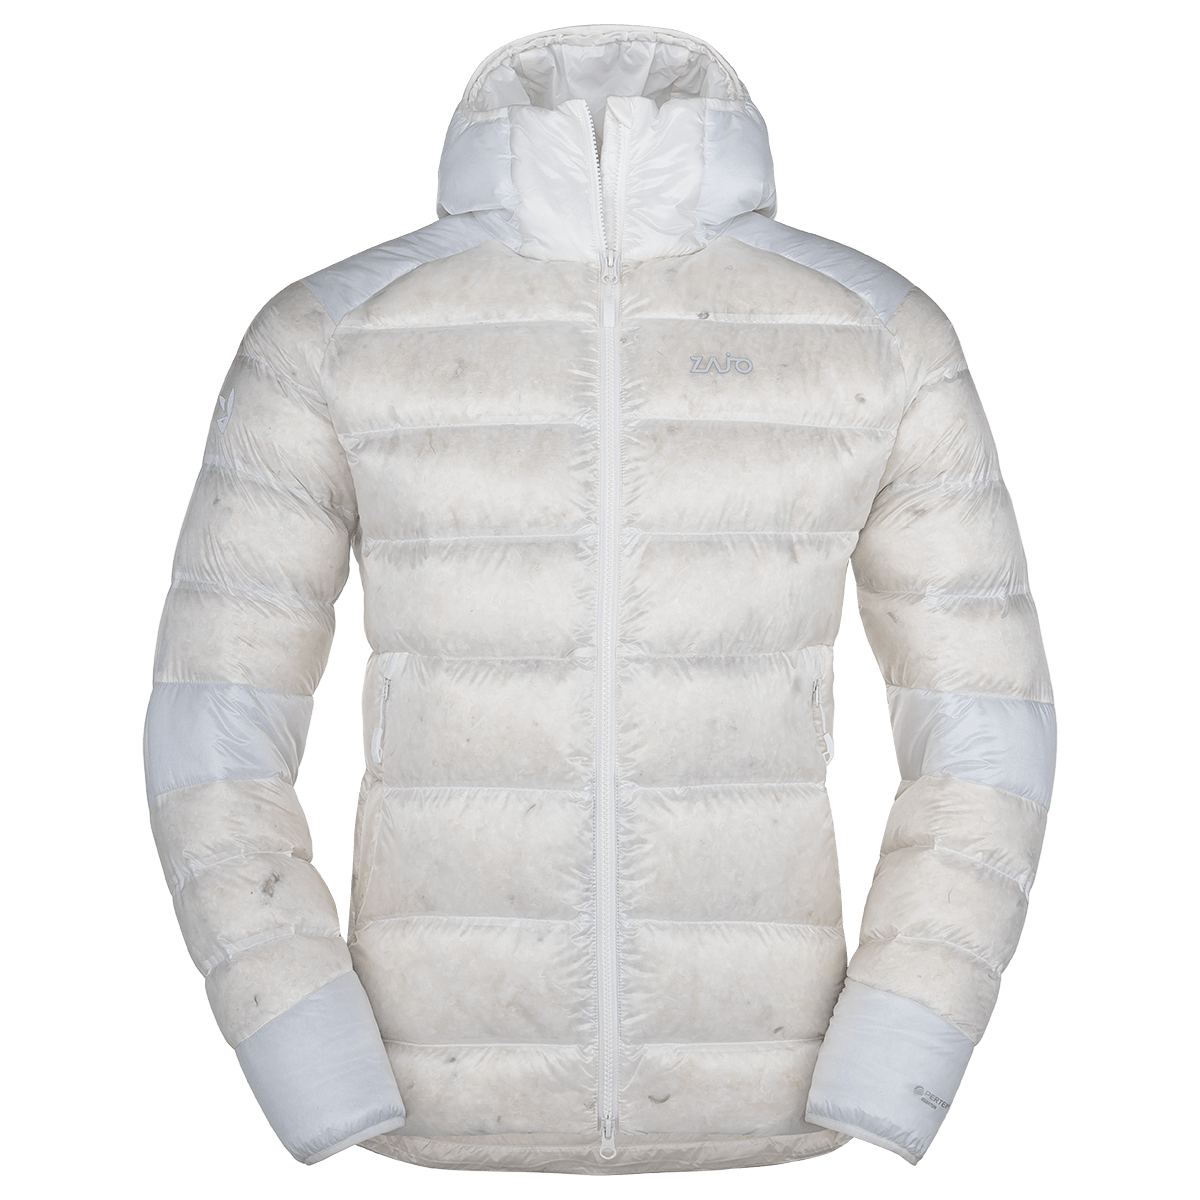 Why are our down jackets "dirty"?